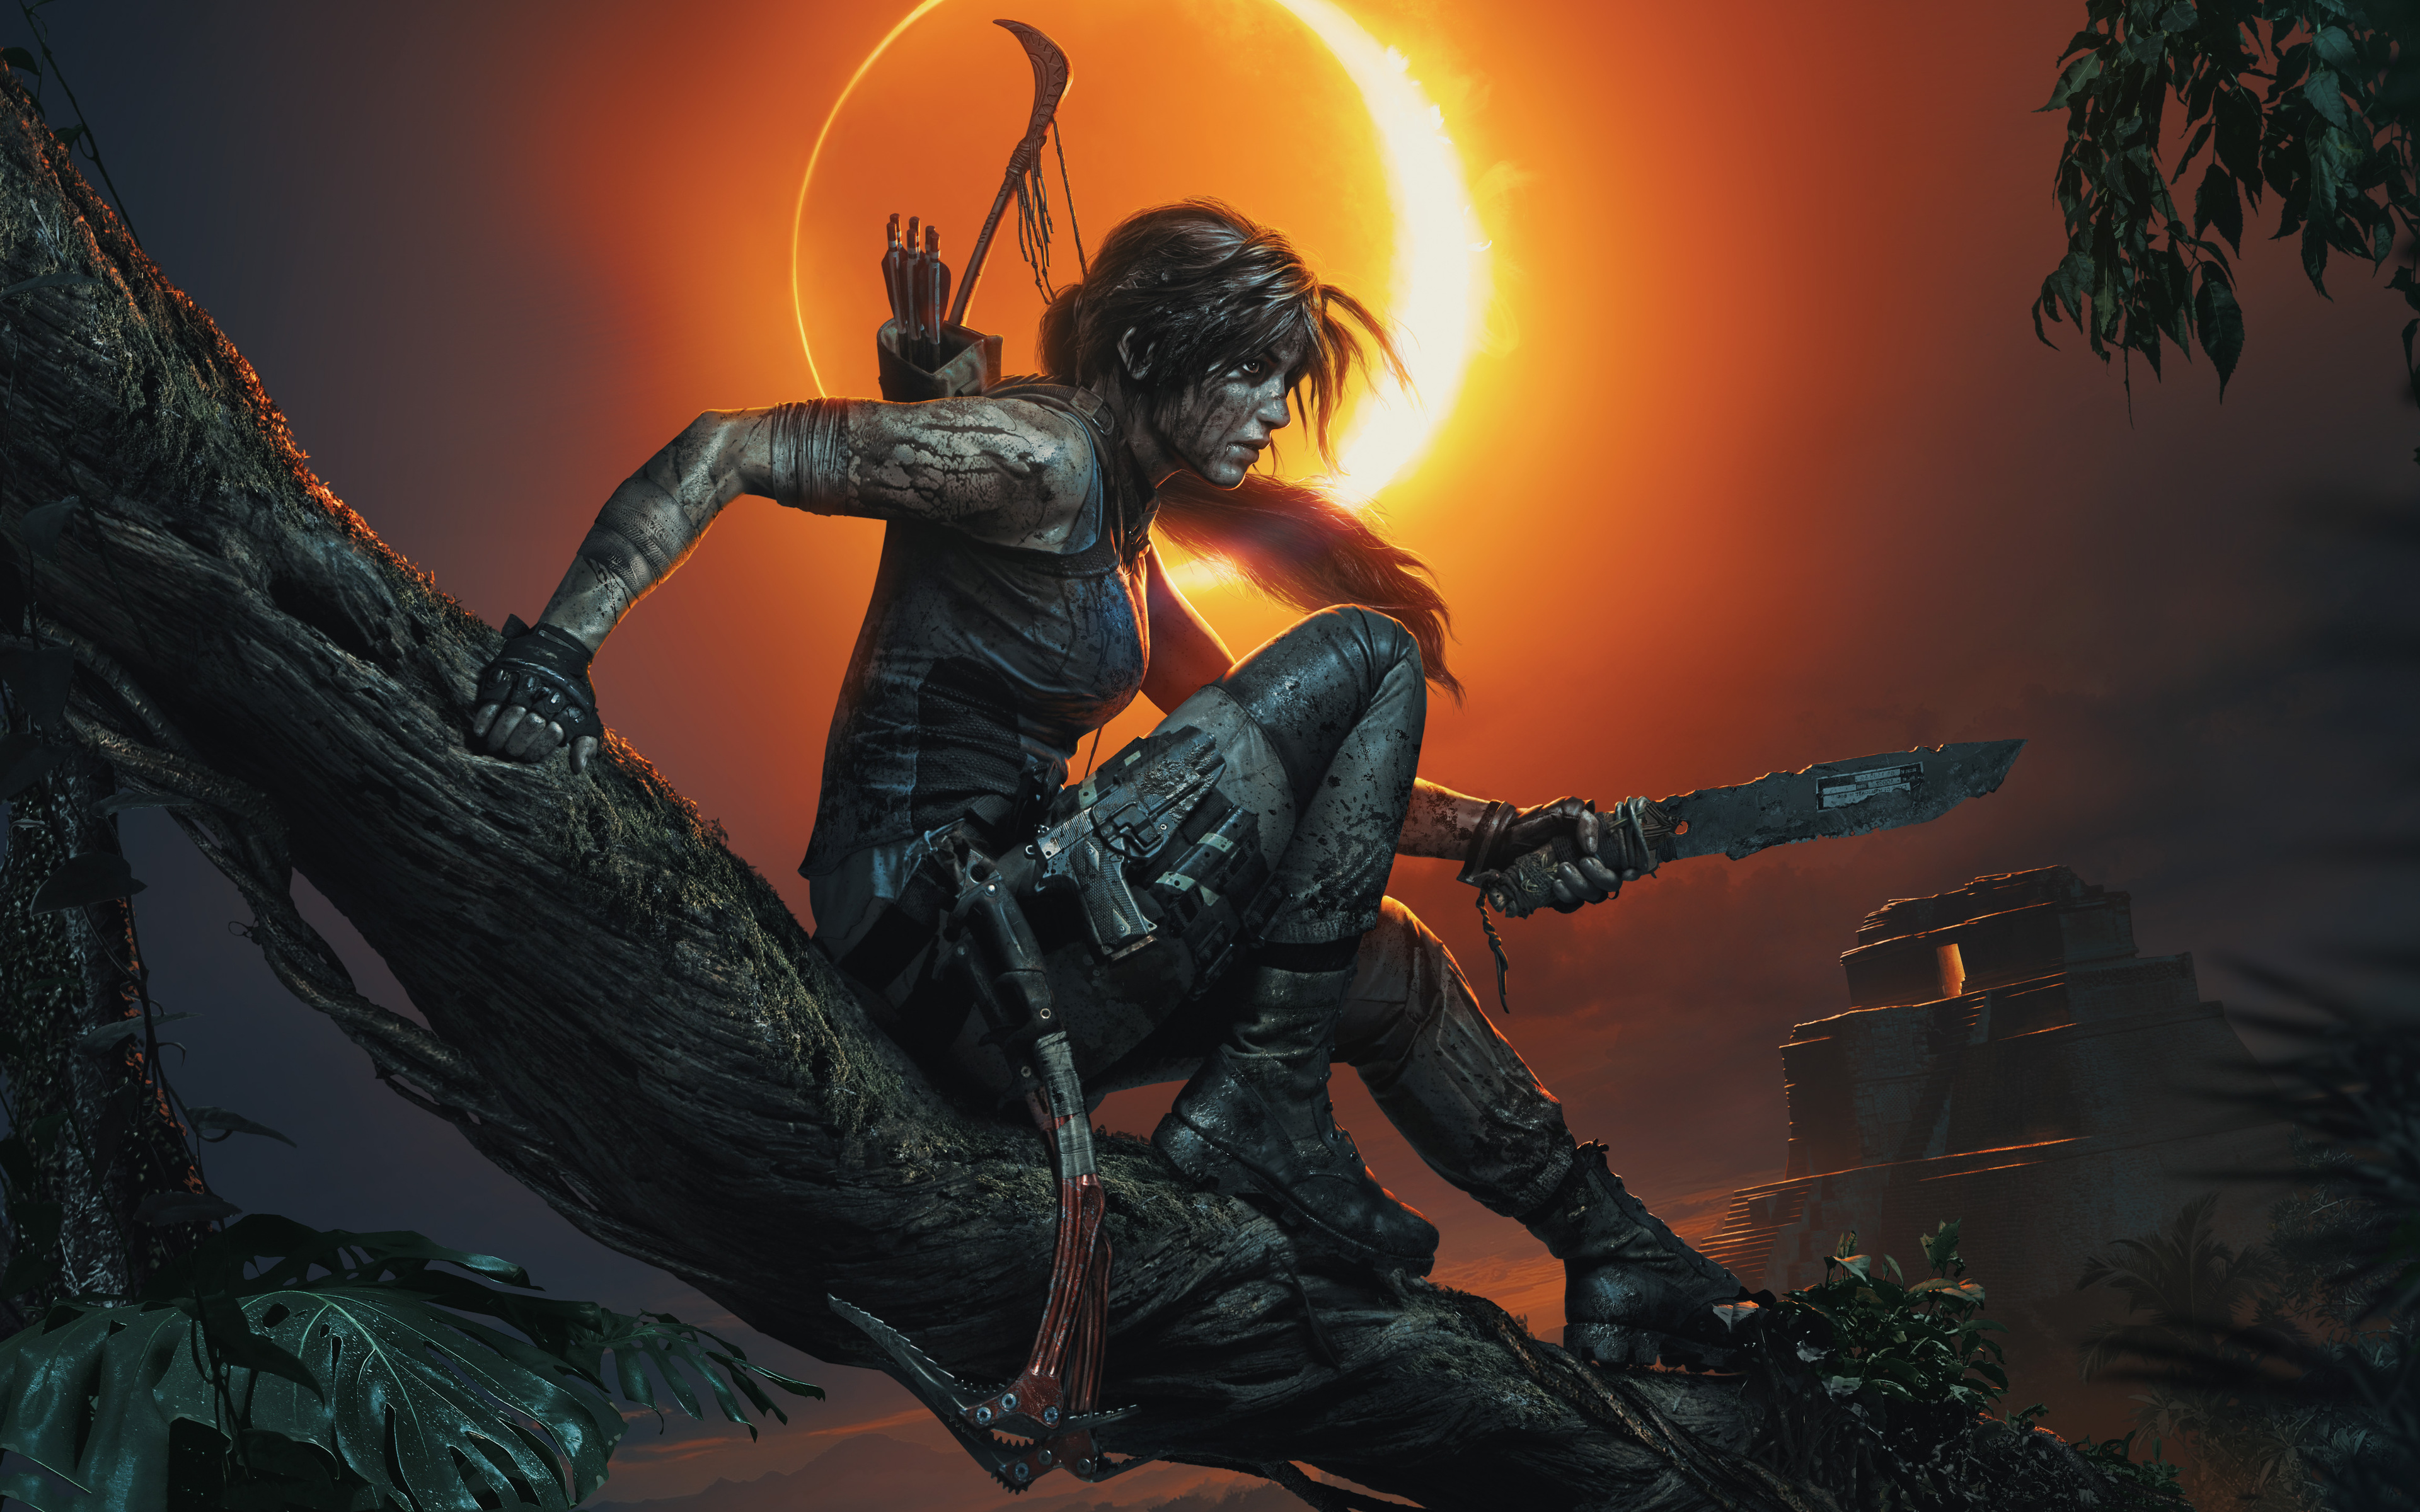 shadow of the tomb raider pc